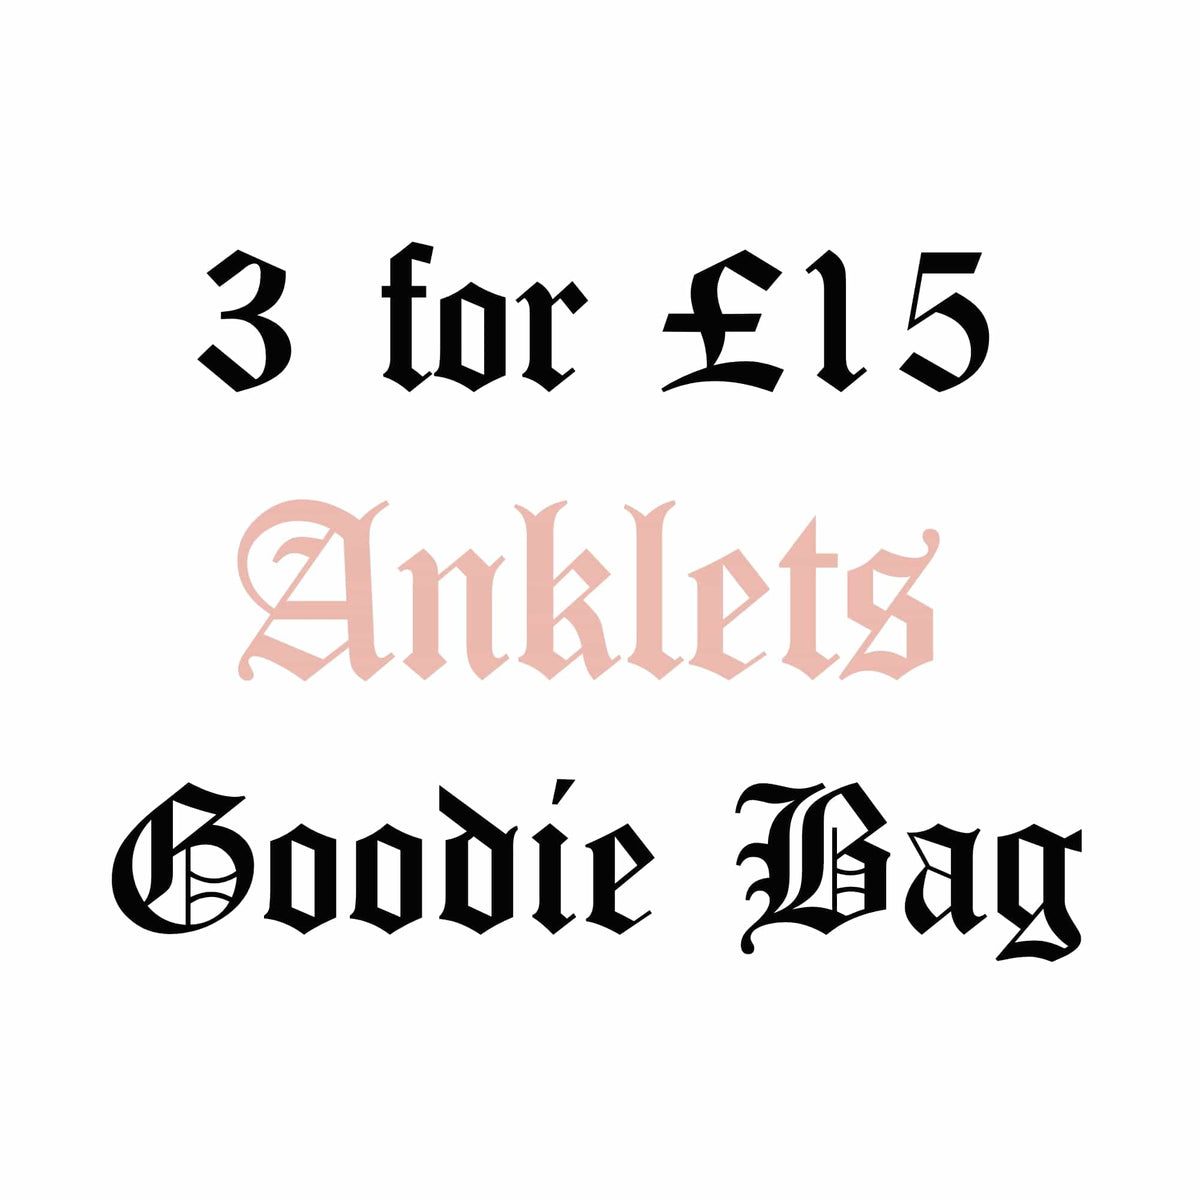 BOHOMOON Stainless Steel 3 for £15 Goodie Bag - Anklets